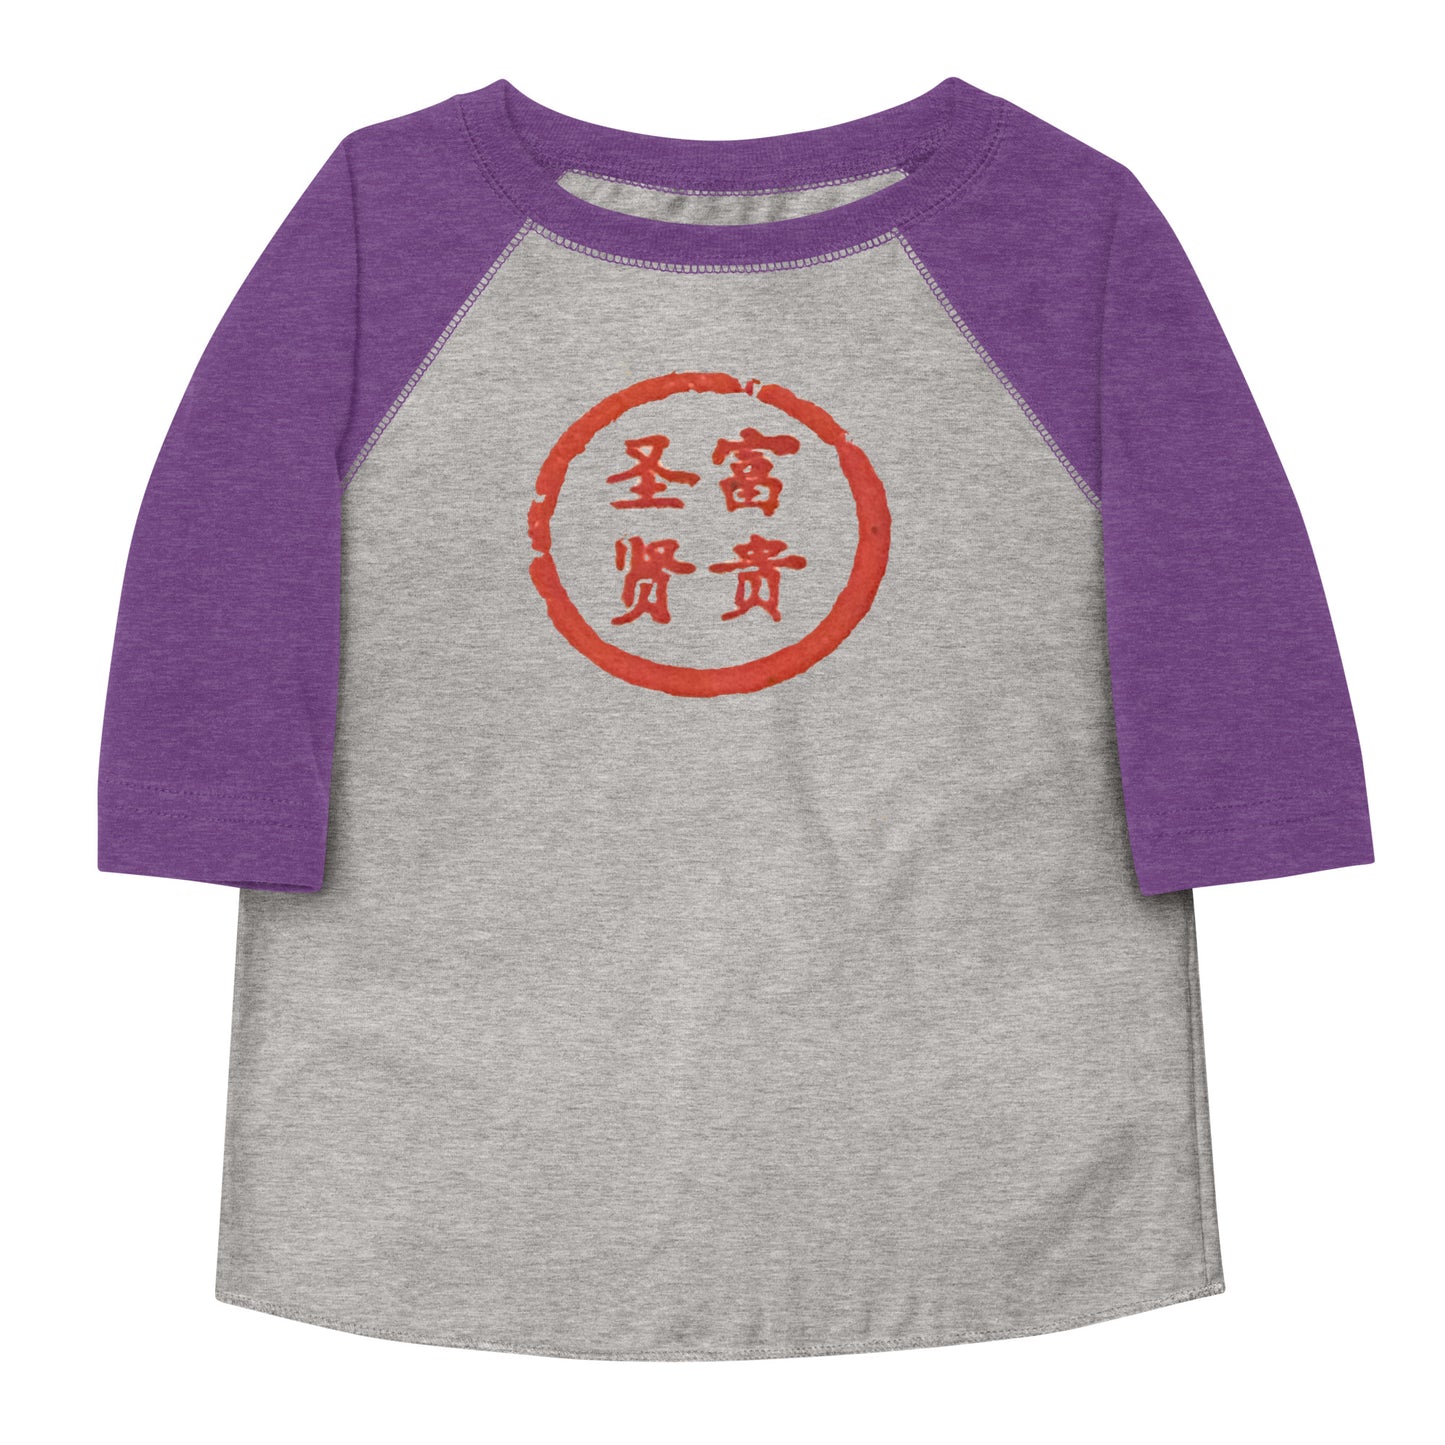 Wealthy Sages Toddler Tee